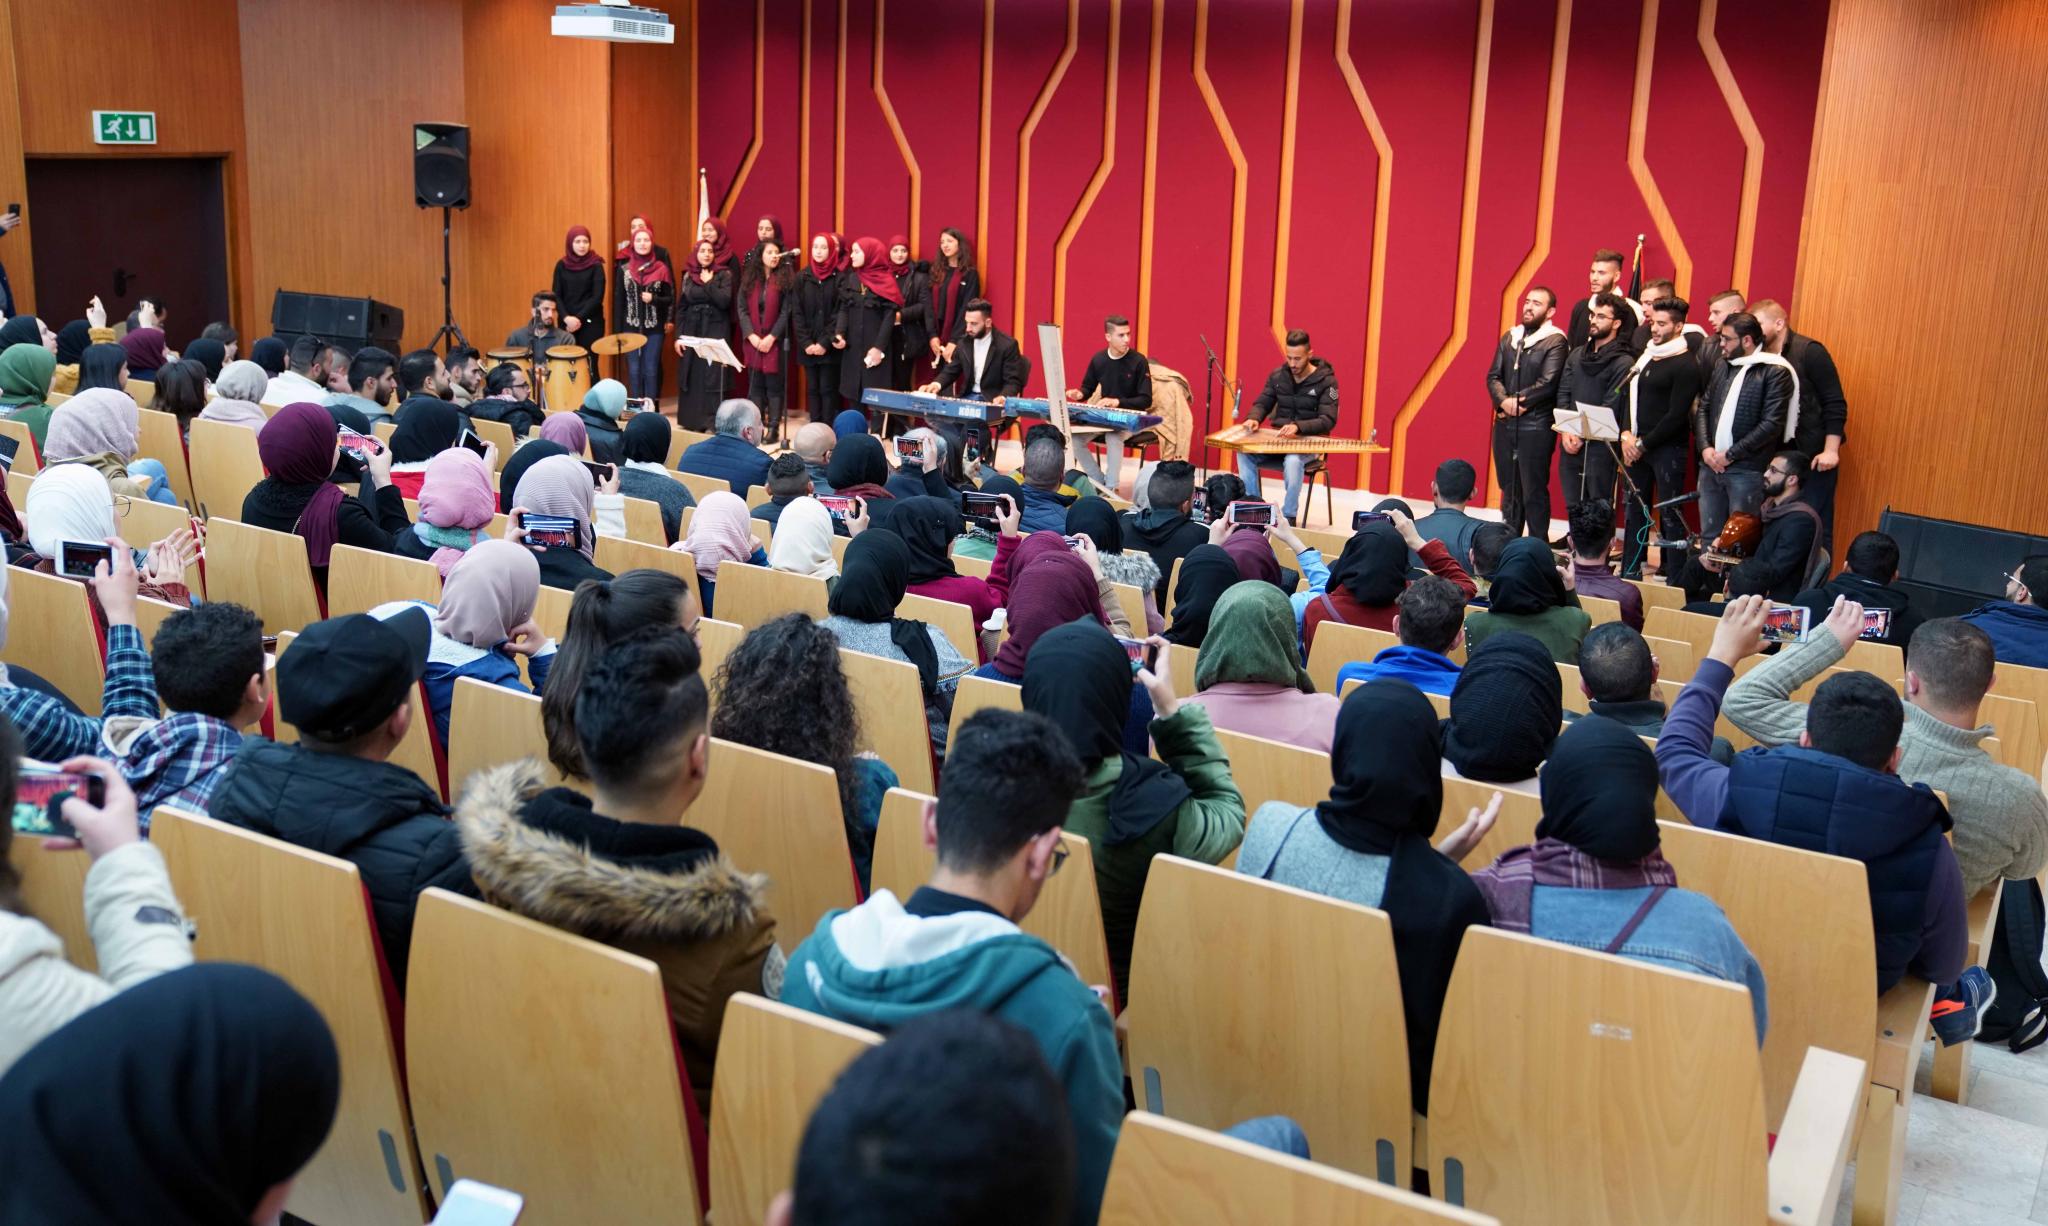 The Choir Band of the University Plays a Musical Show in Front of the Students